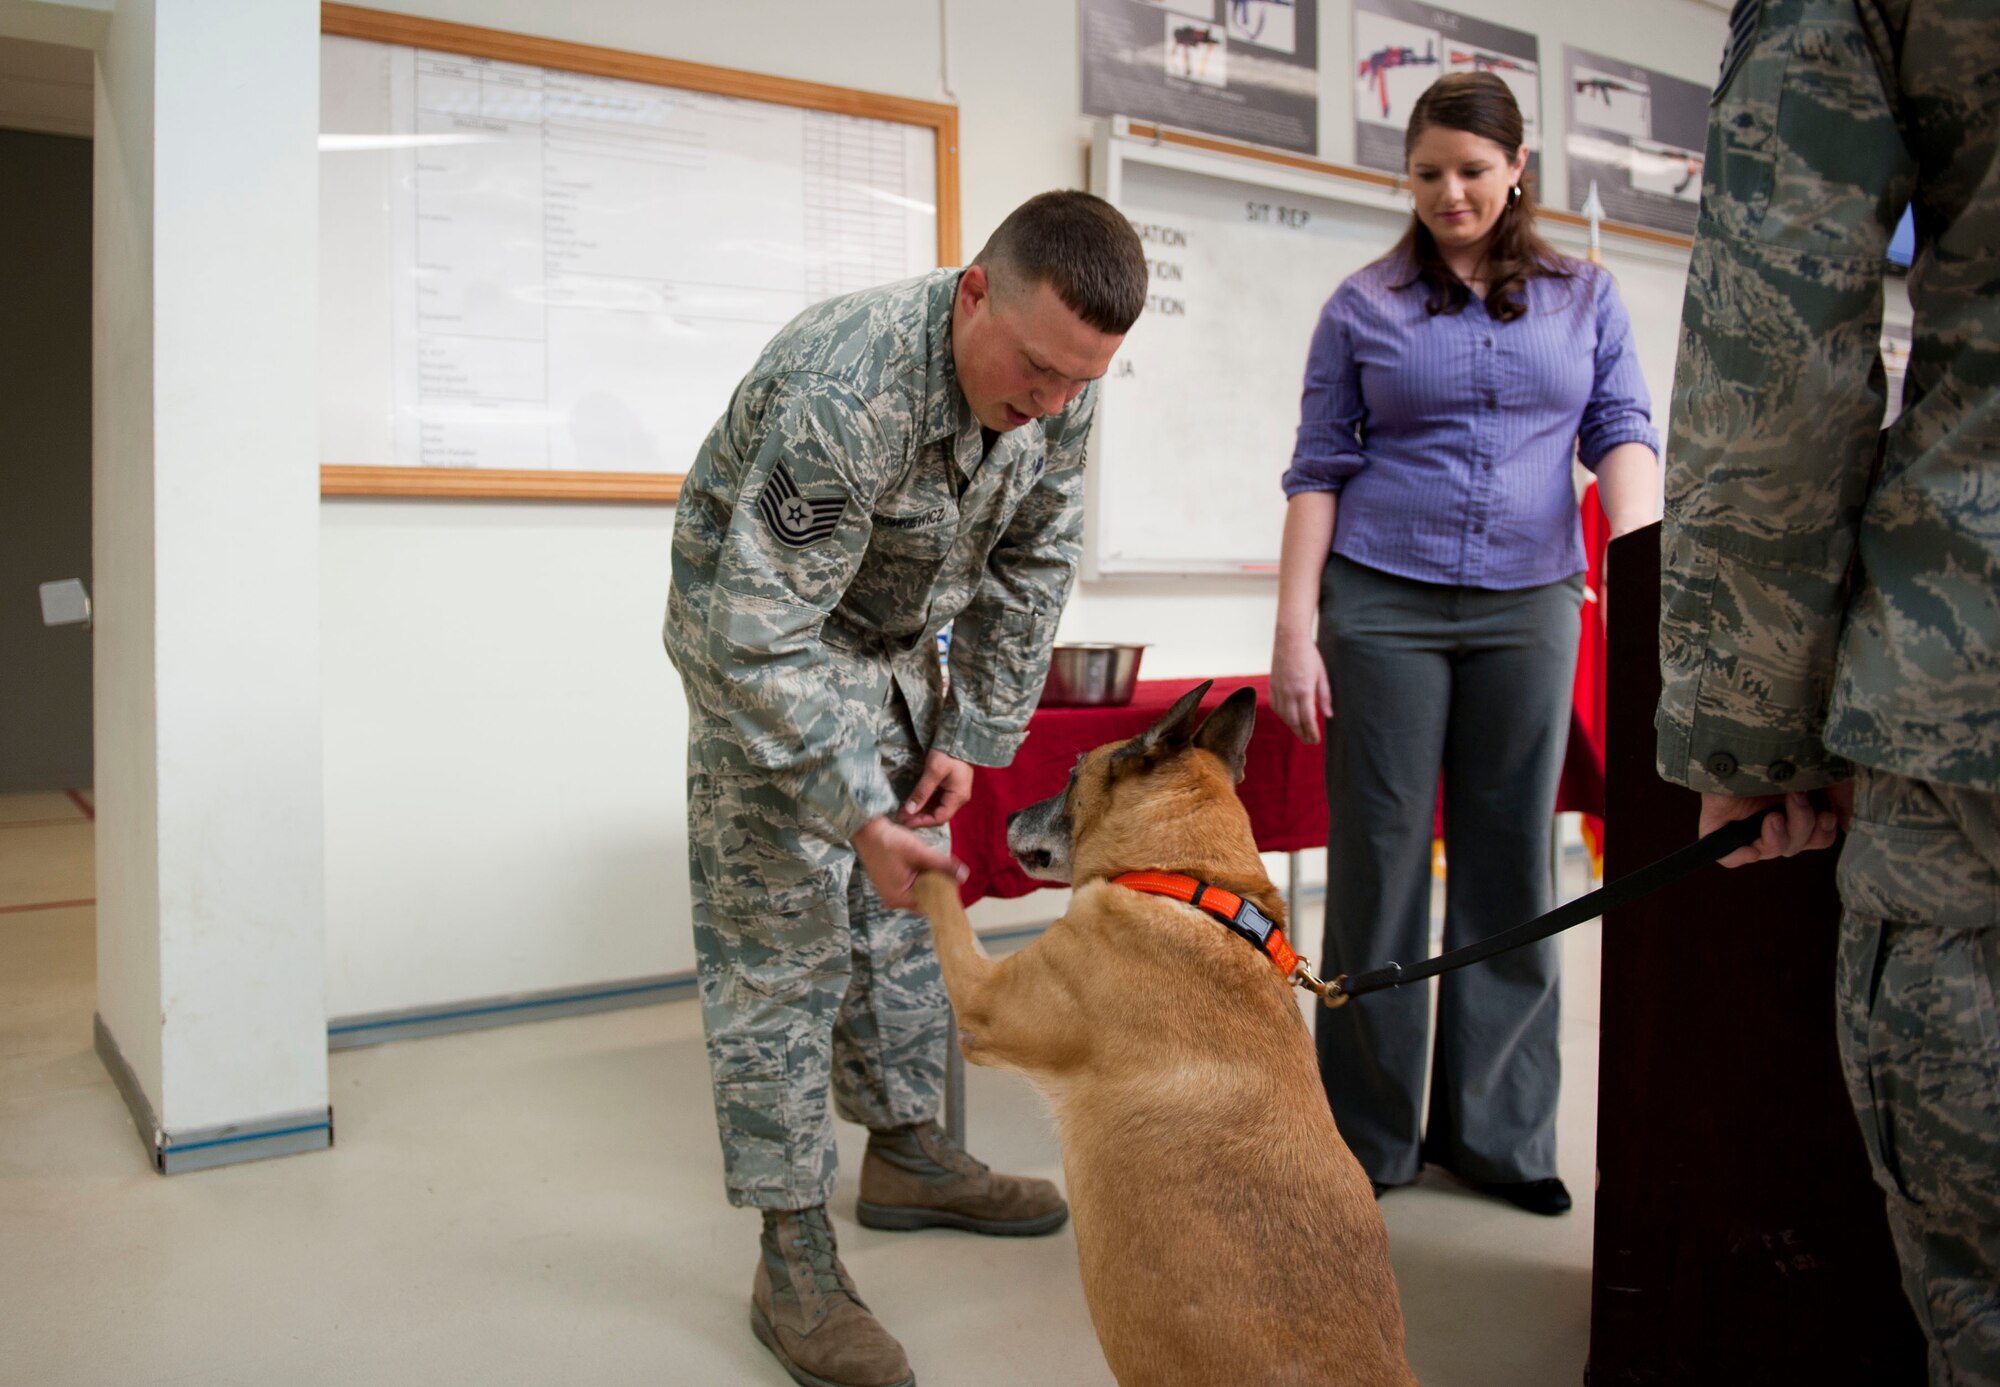 Tech. Sgt. Jeffrey Tomkiewicz, 39th Security Forces Squadron kennel master, plays with Max, a military working dog, March 23, 2012, in the 39th SFS guardmount room at Incirlik Air Base, Turkey before the dog's retirement ceremony. Max retired because of deteriorating health conditions caused by age. Max moved in with his adopted owners, the Ball family, a few weeks ago while the squadron planned his formal retirement. (U.S. Air Force photo by Senior Airman William A. O'Brien/Released)